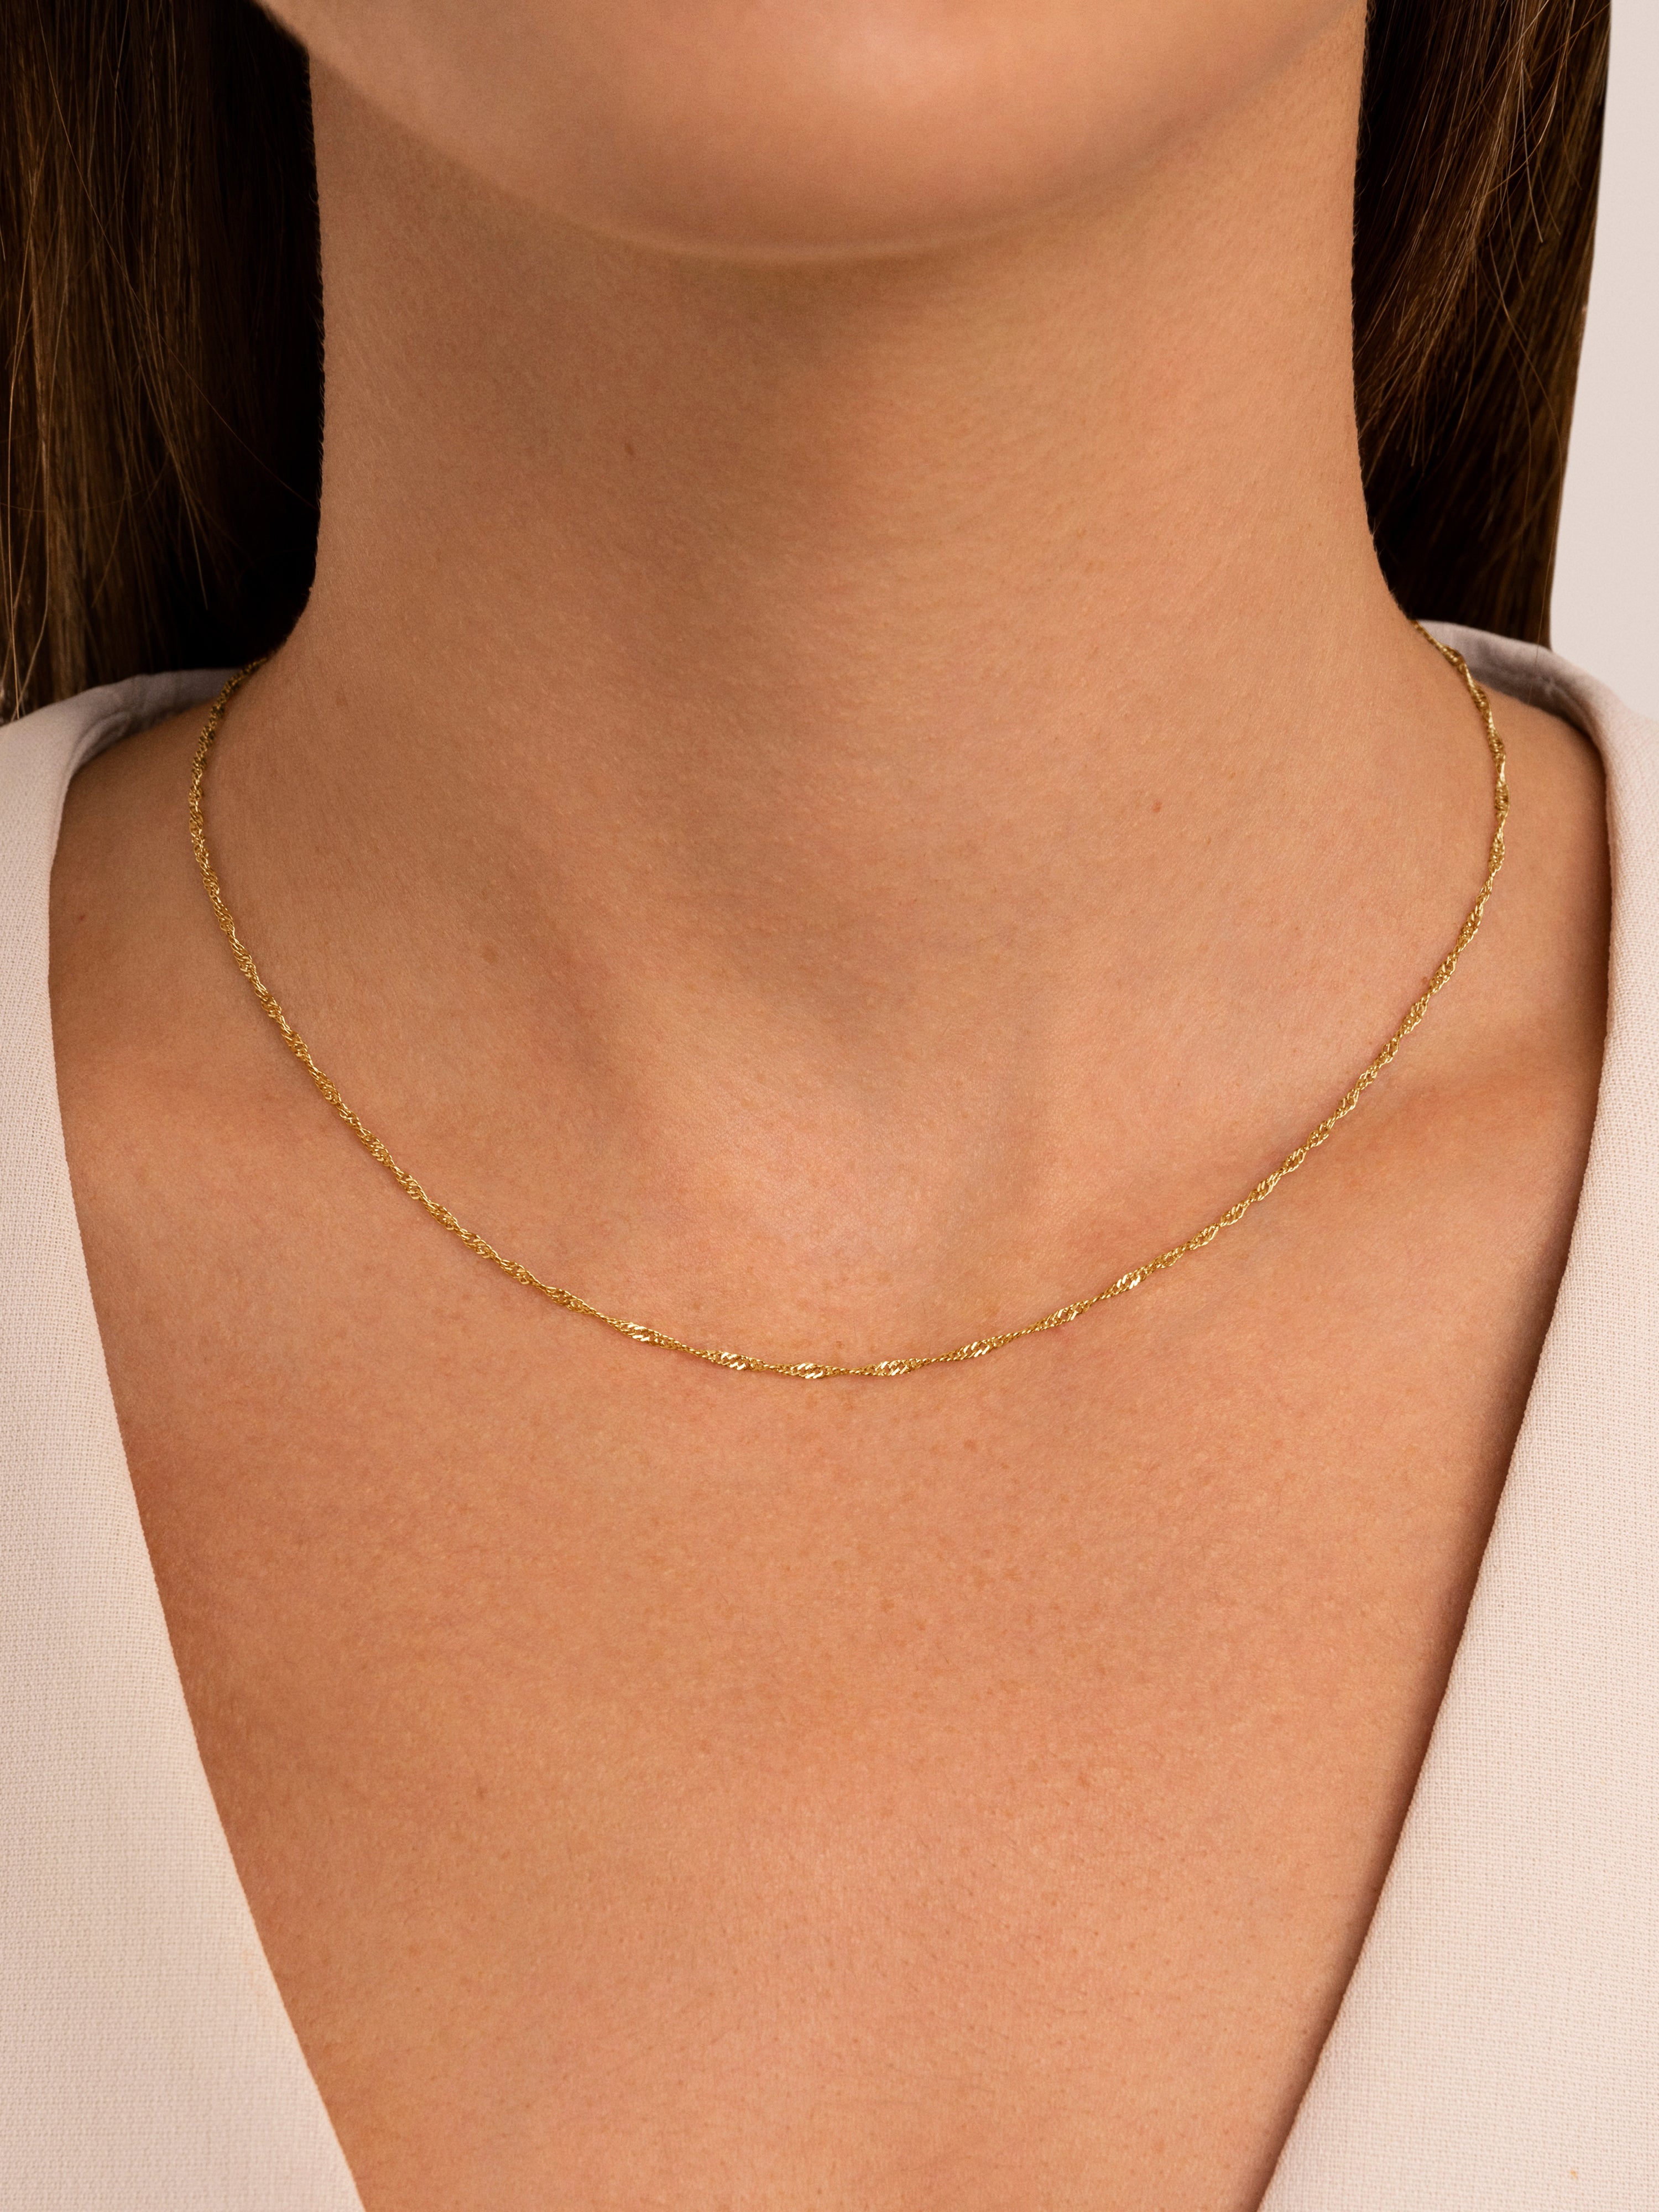 Mini Twist Stainless Steel Gold Necklace